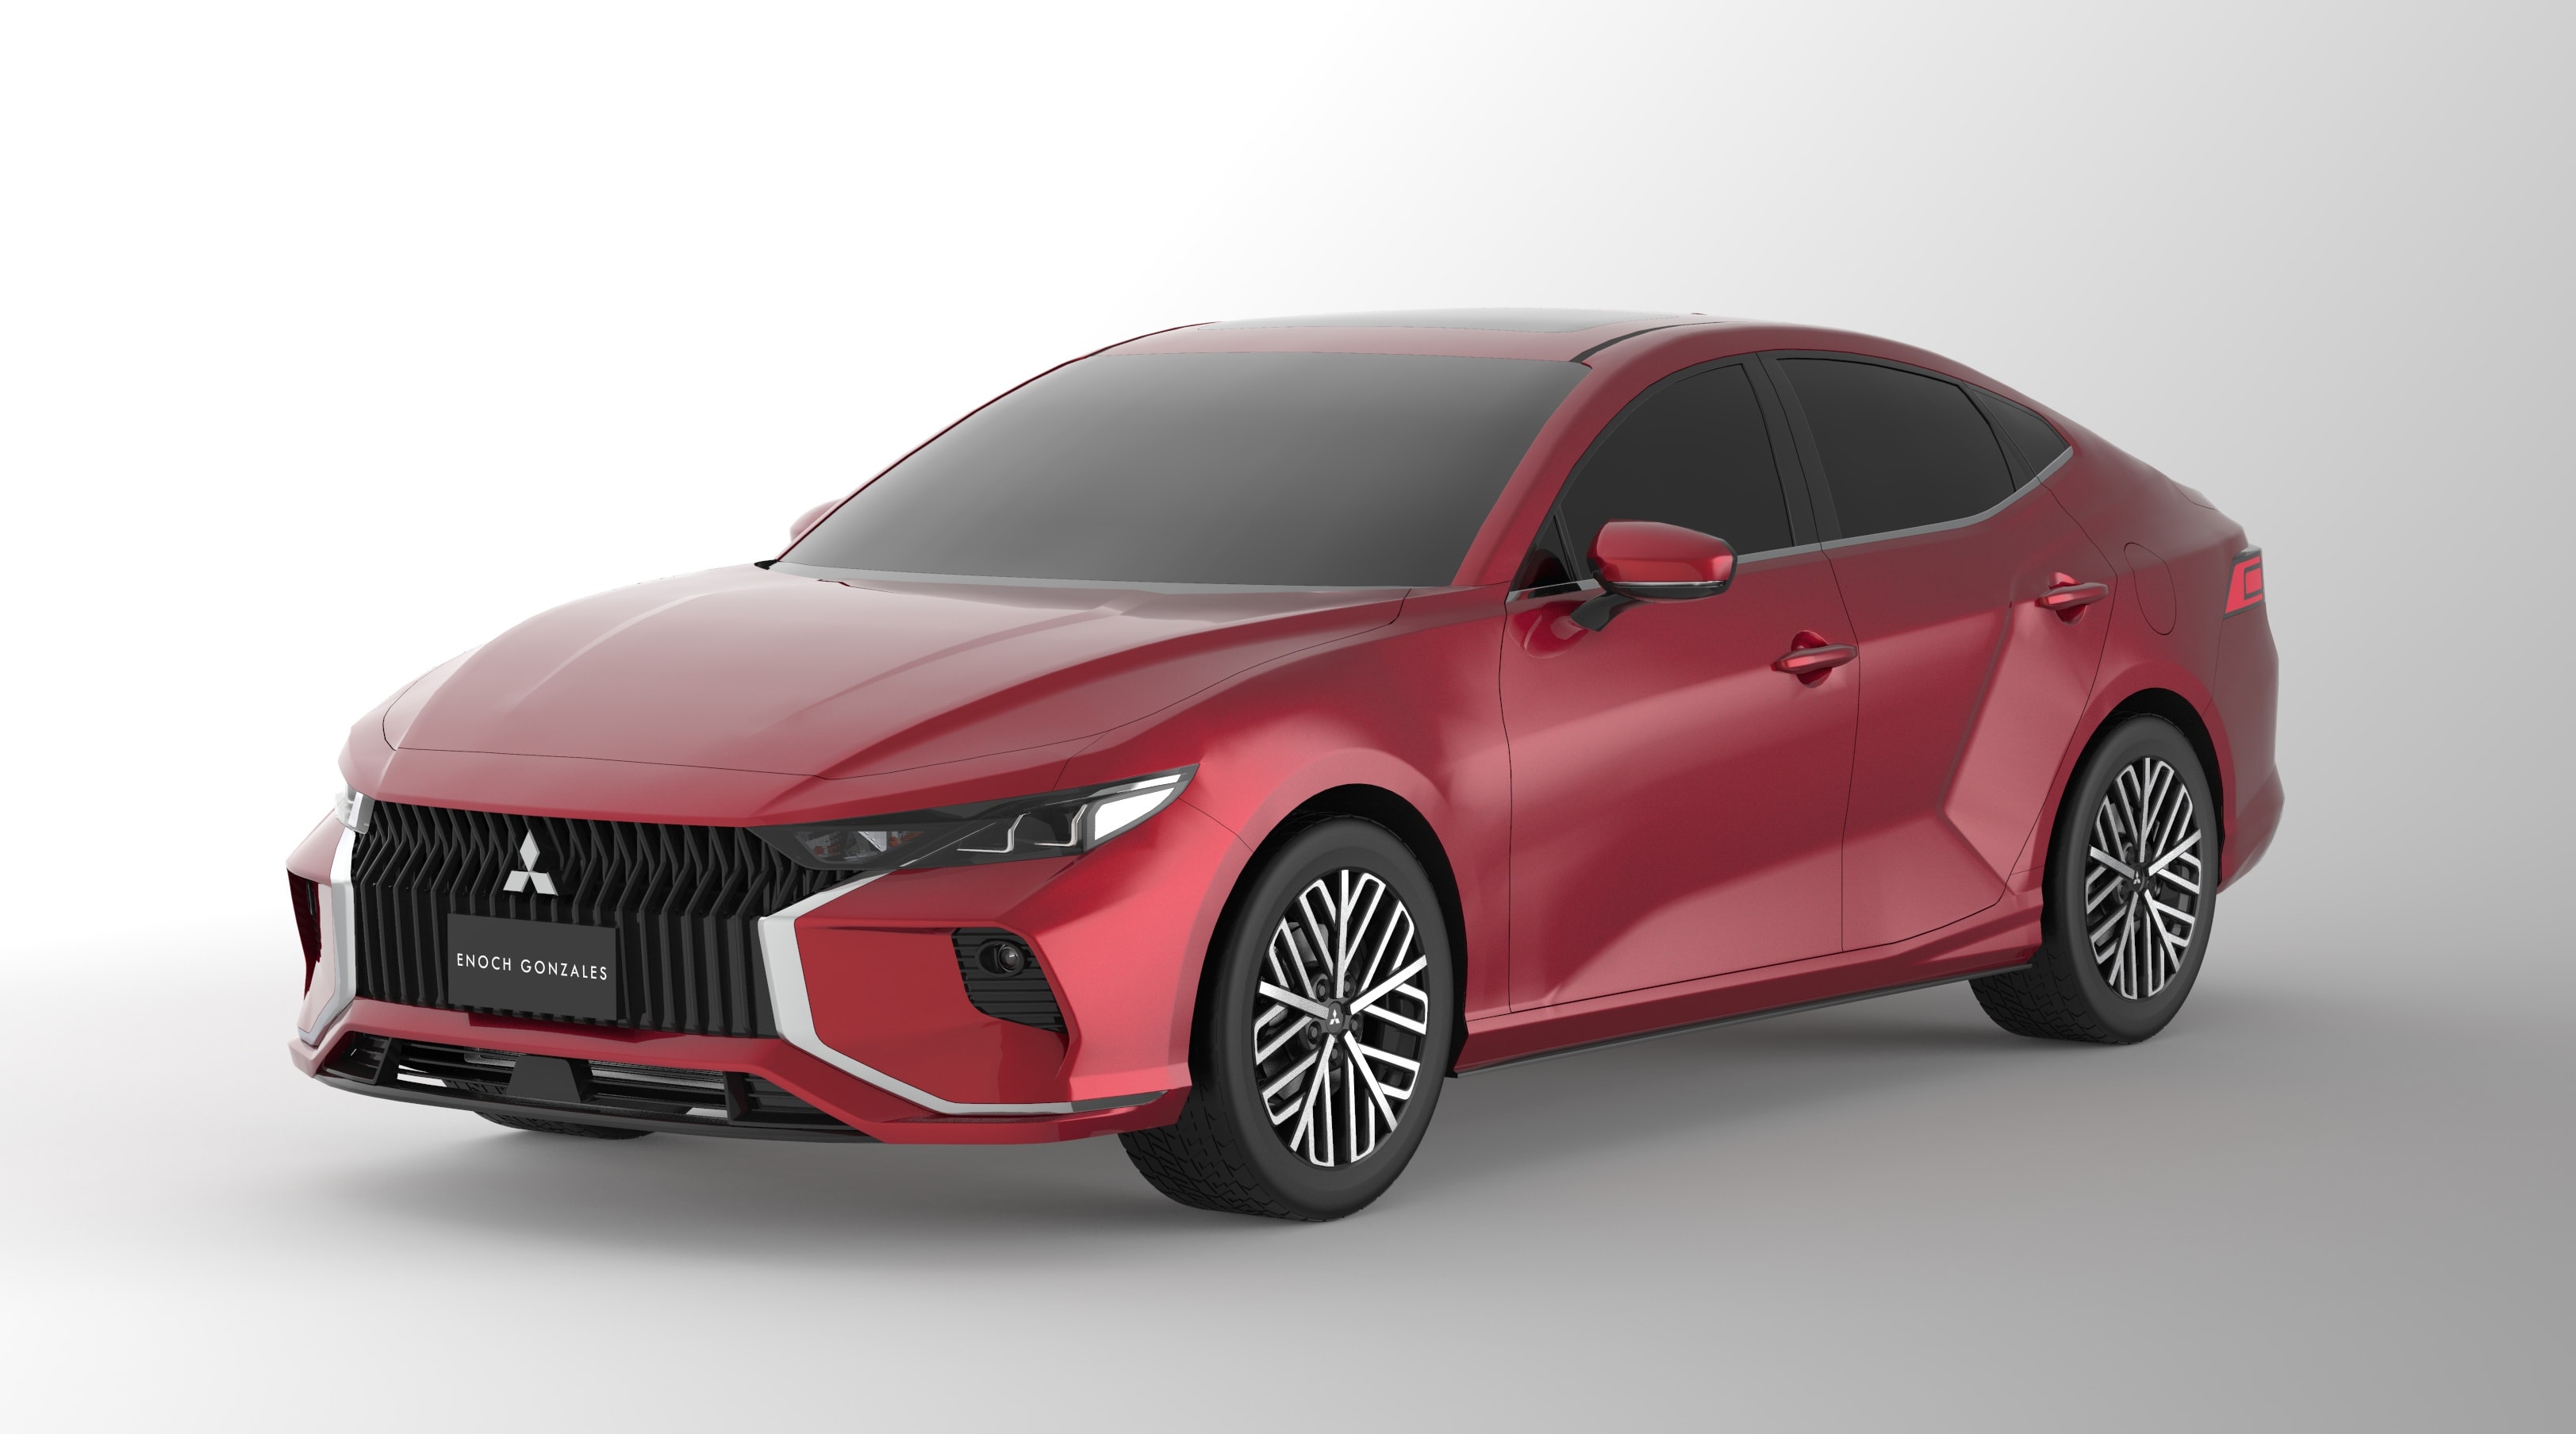 all-new-2023-mitsubishi-lancer-rendering-features-a-completely-original